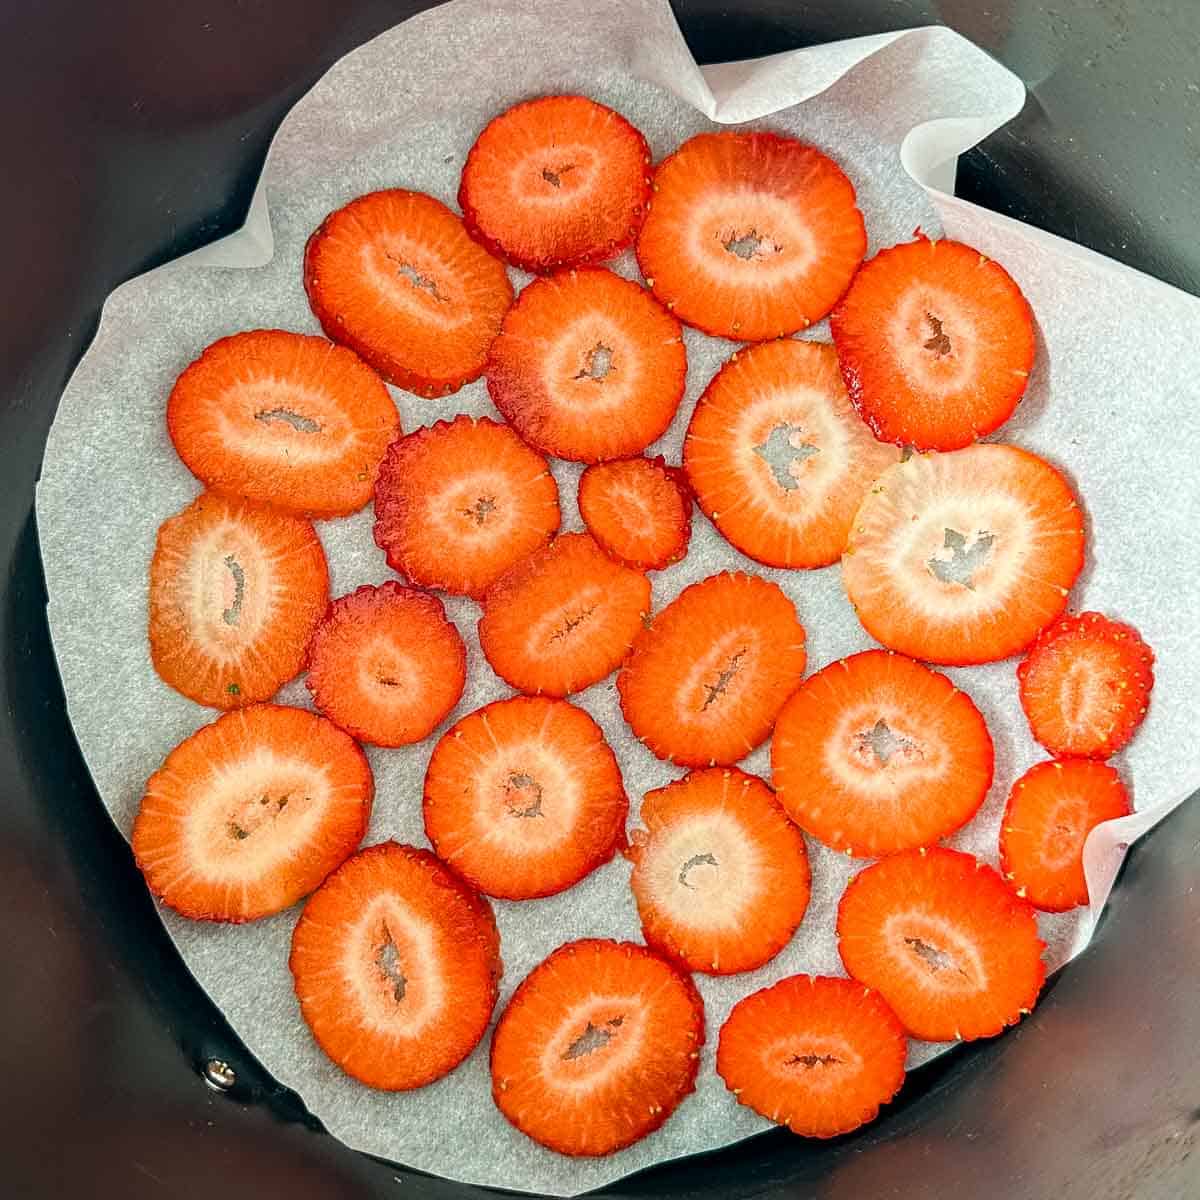 Sliced strawberries arranged in a single layer on parchment paper in an air fryer basket.